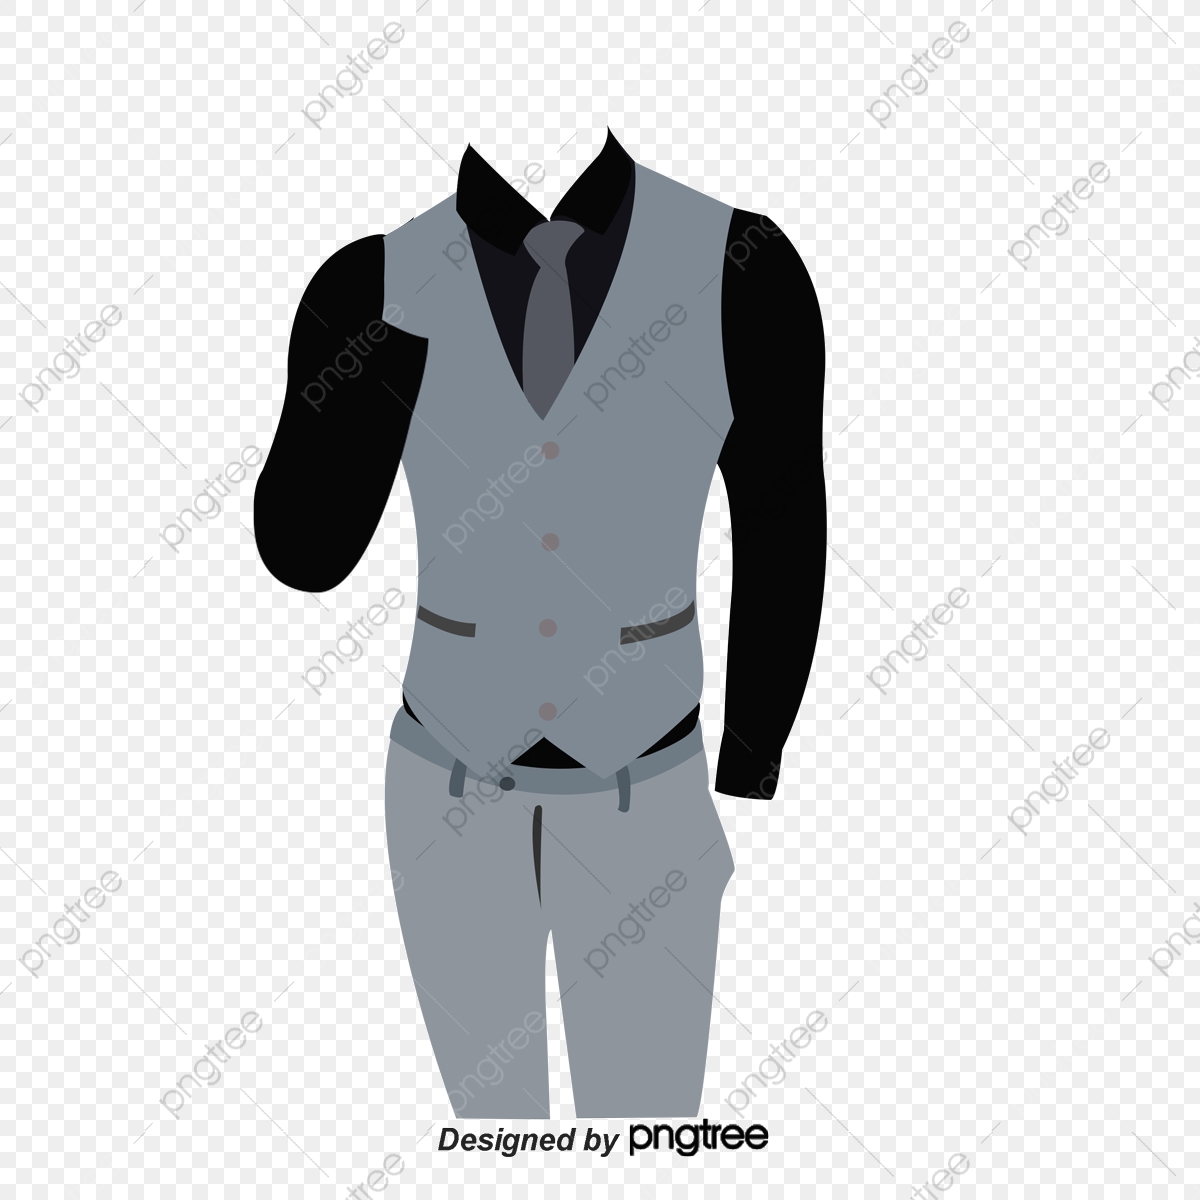 Suit clipart teal, Suit teal Transparent FREE for download on ...